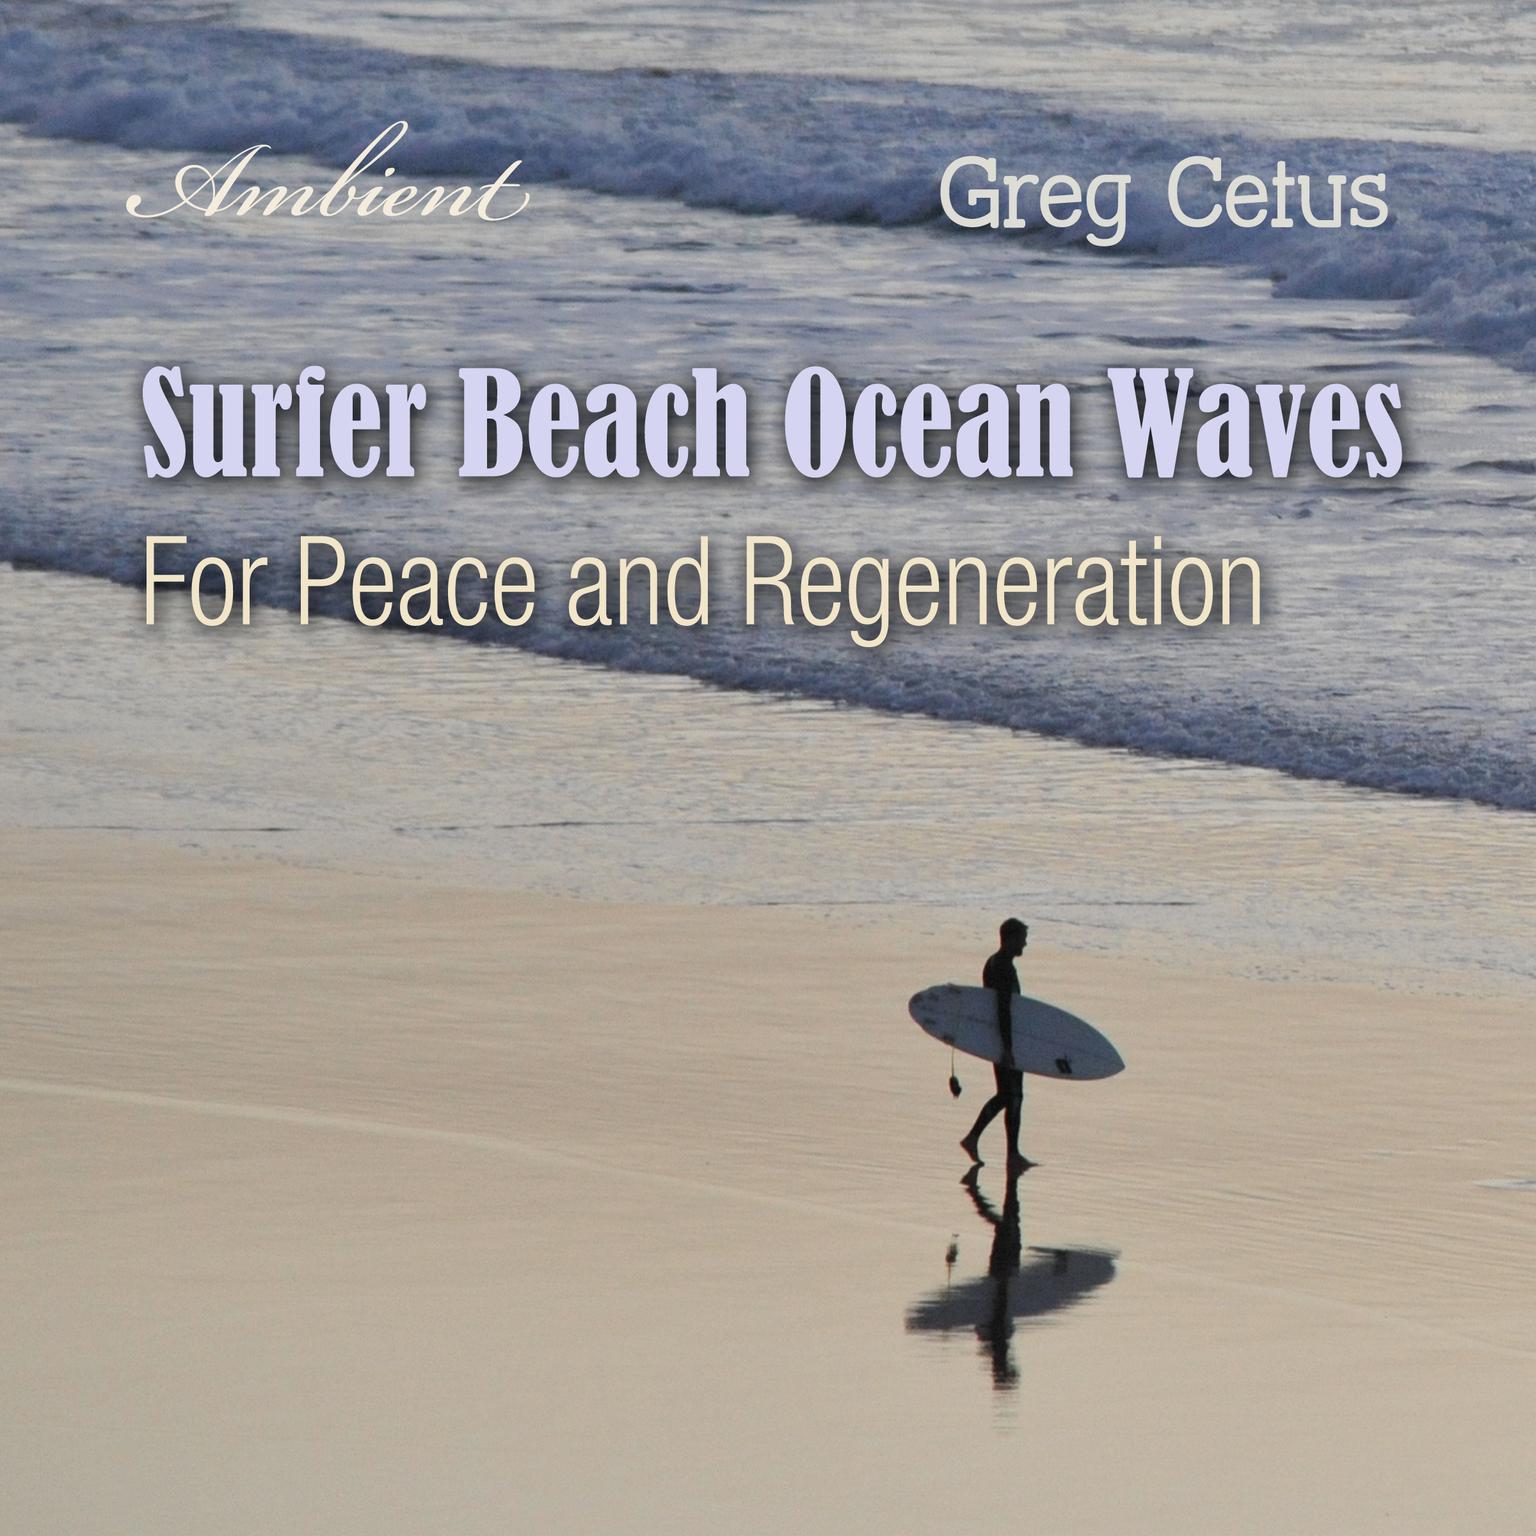 Surfer Beach Ocean Waves: For Peace and Regeneration Audiobook, by Greg Cetus